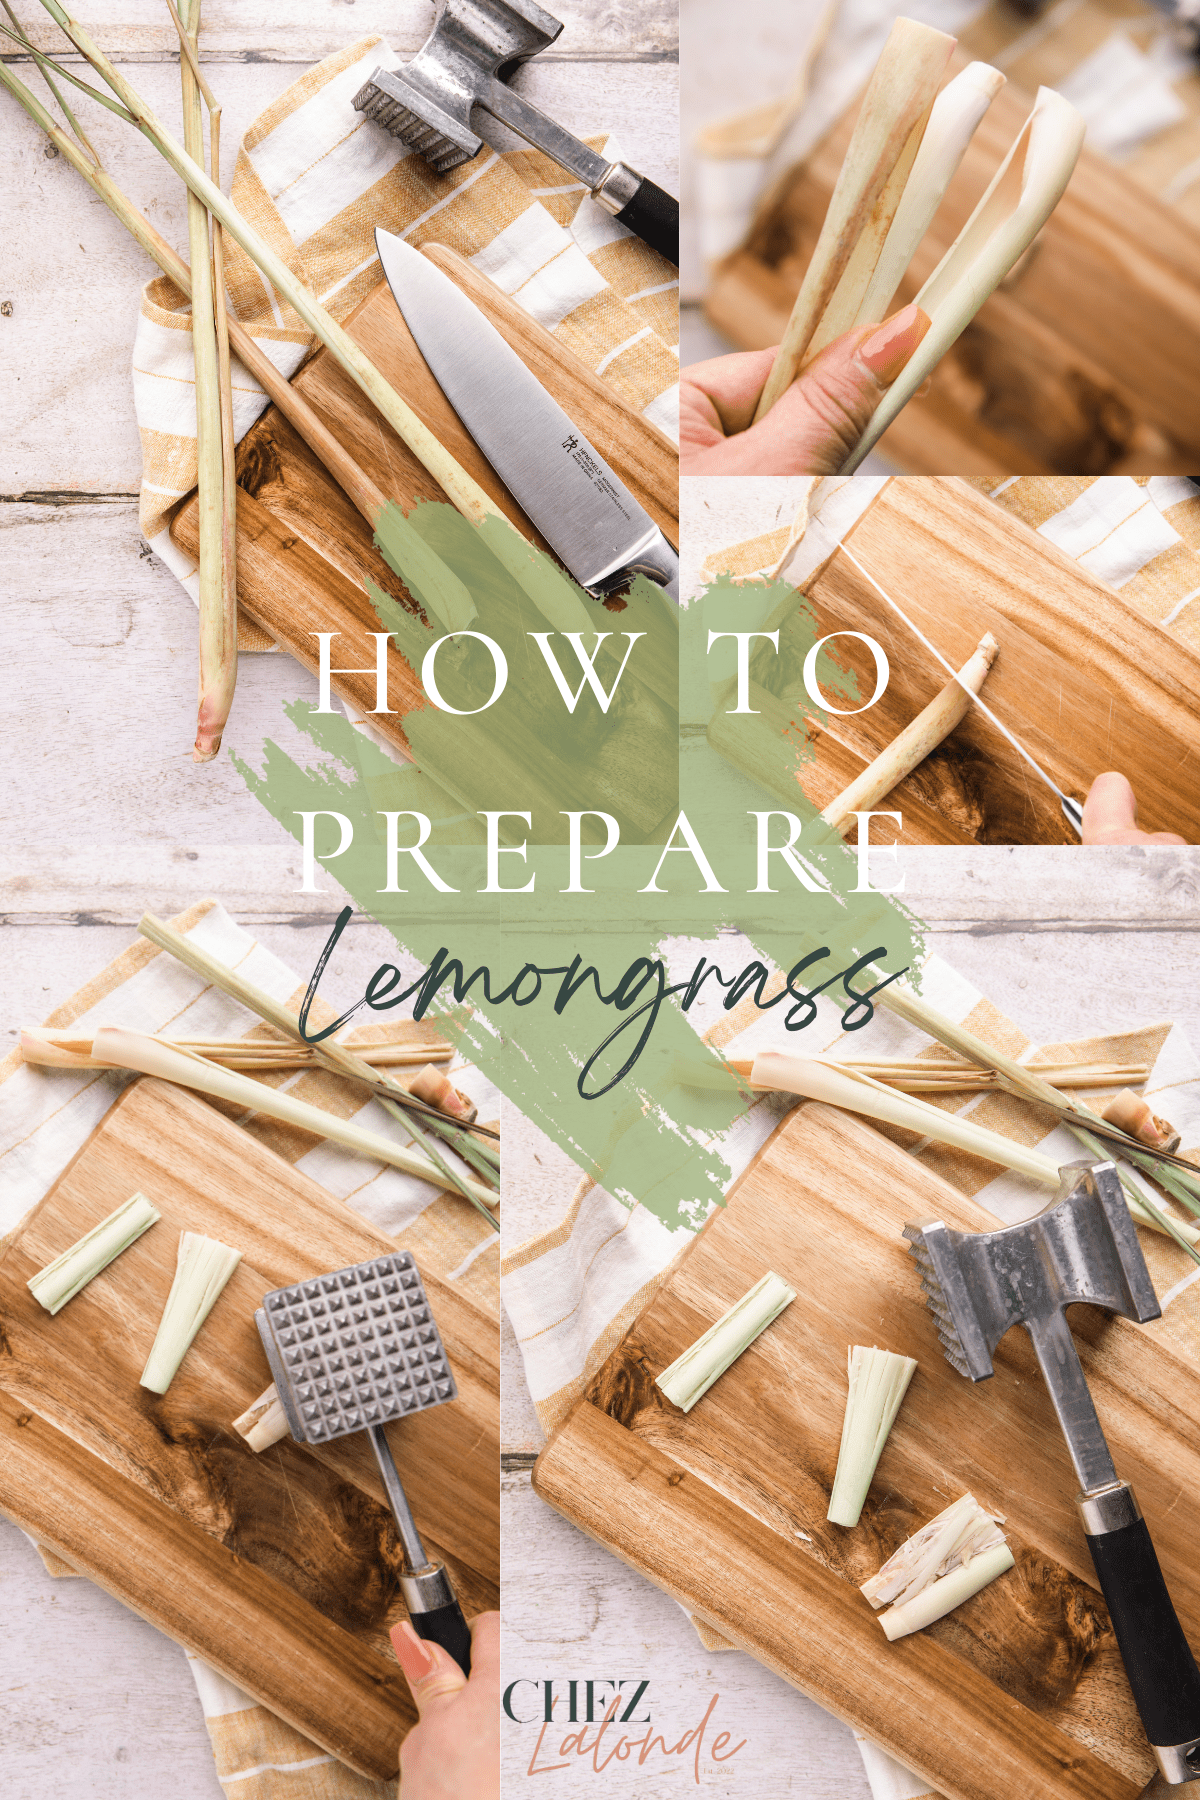 Chez Lalonde - Step by step photos on how to prepare lemongrass